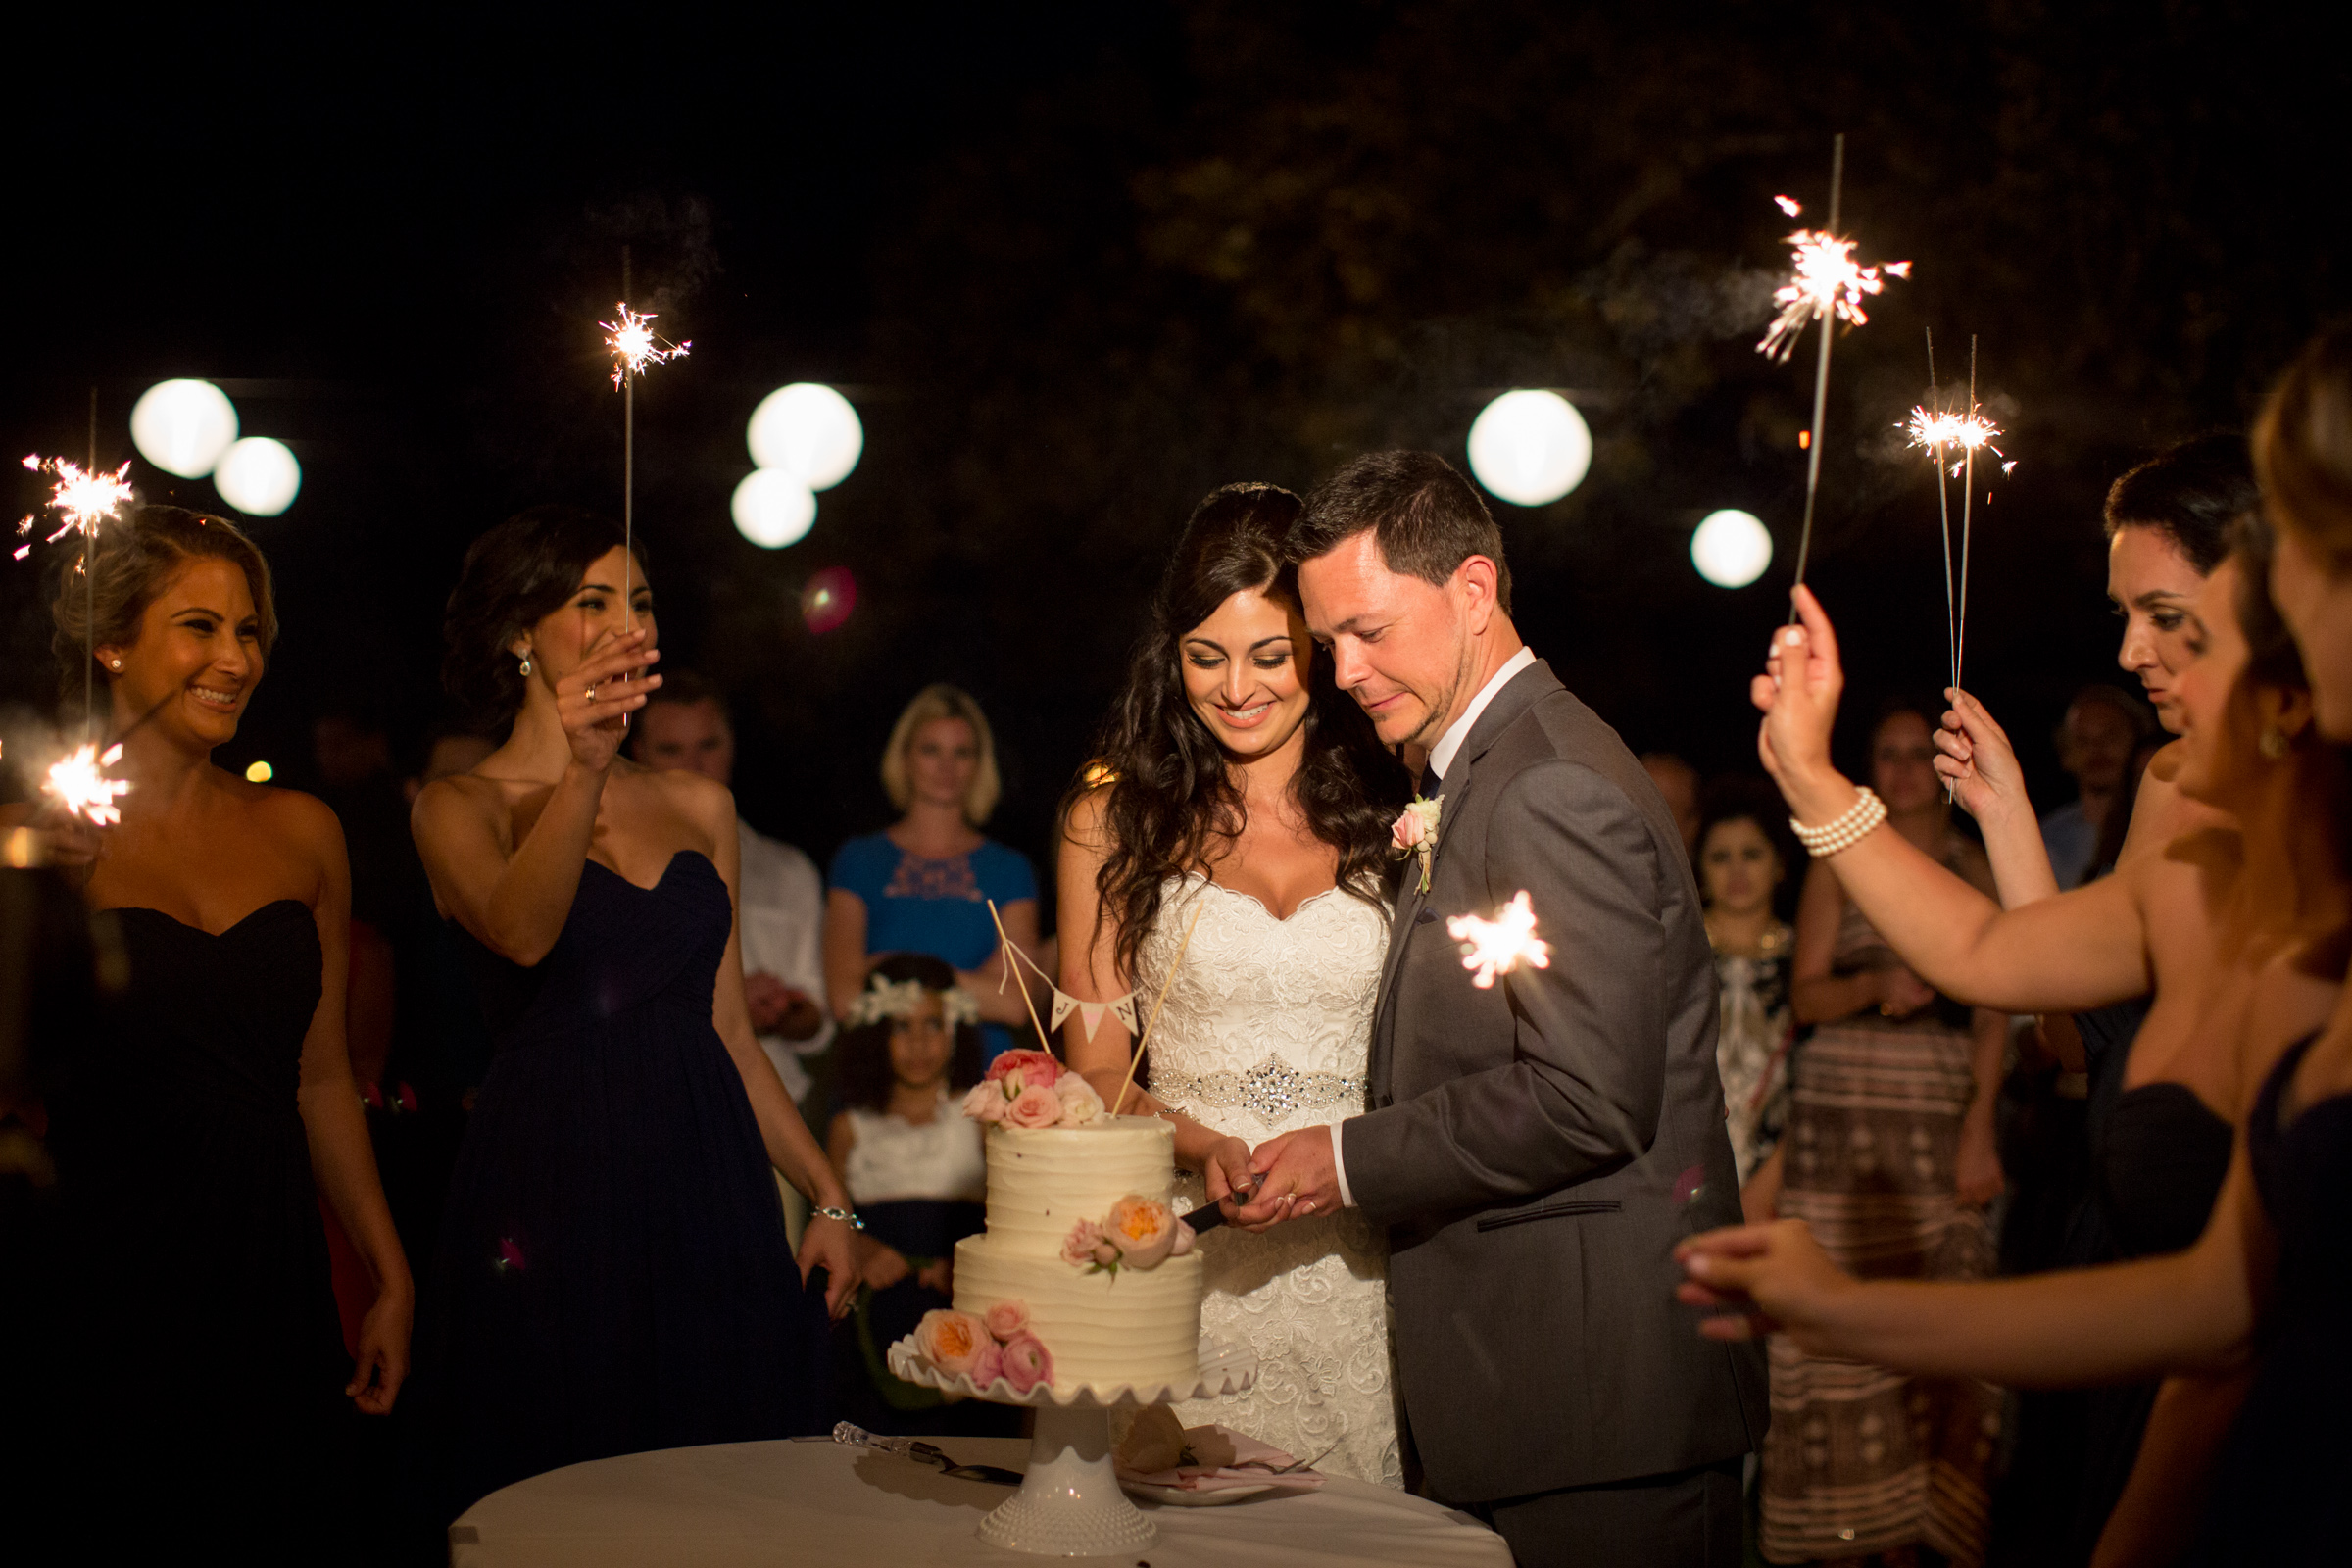 A couple cut their cake at their wedding freception while guests look on with sparklers.